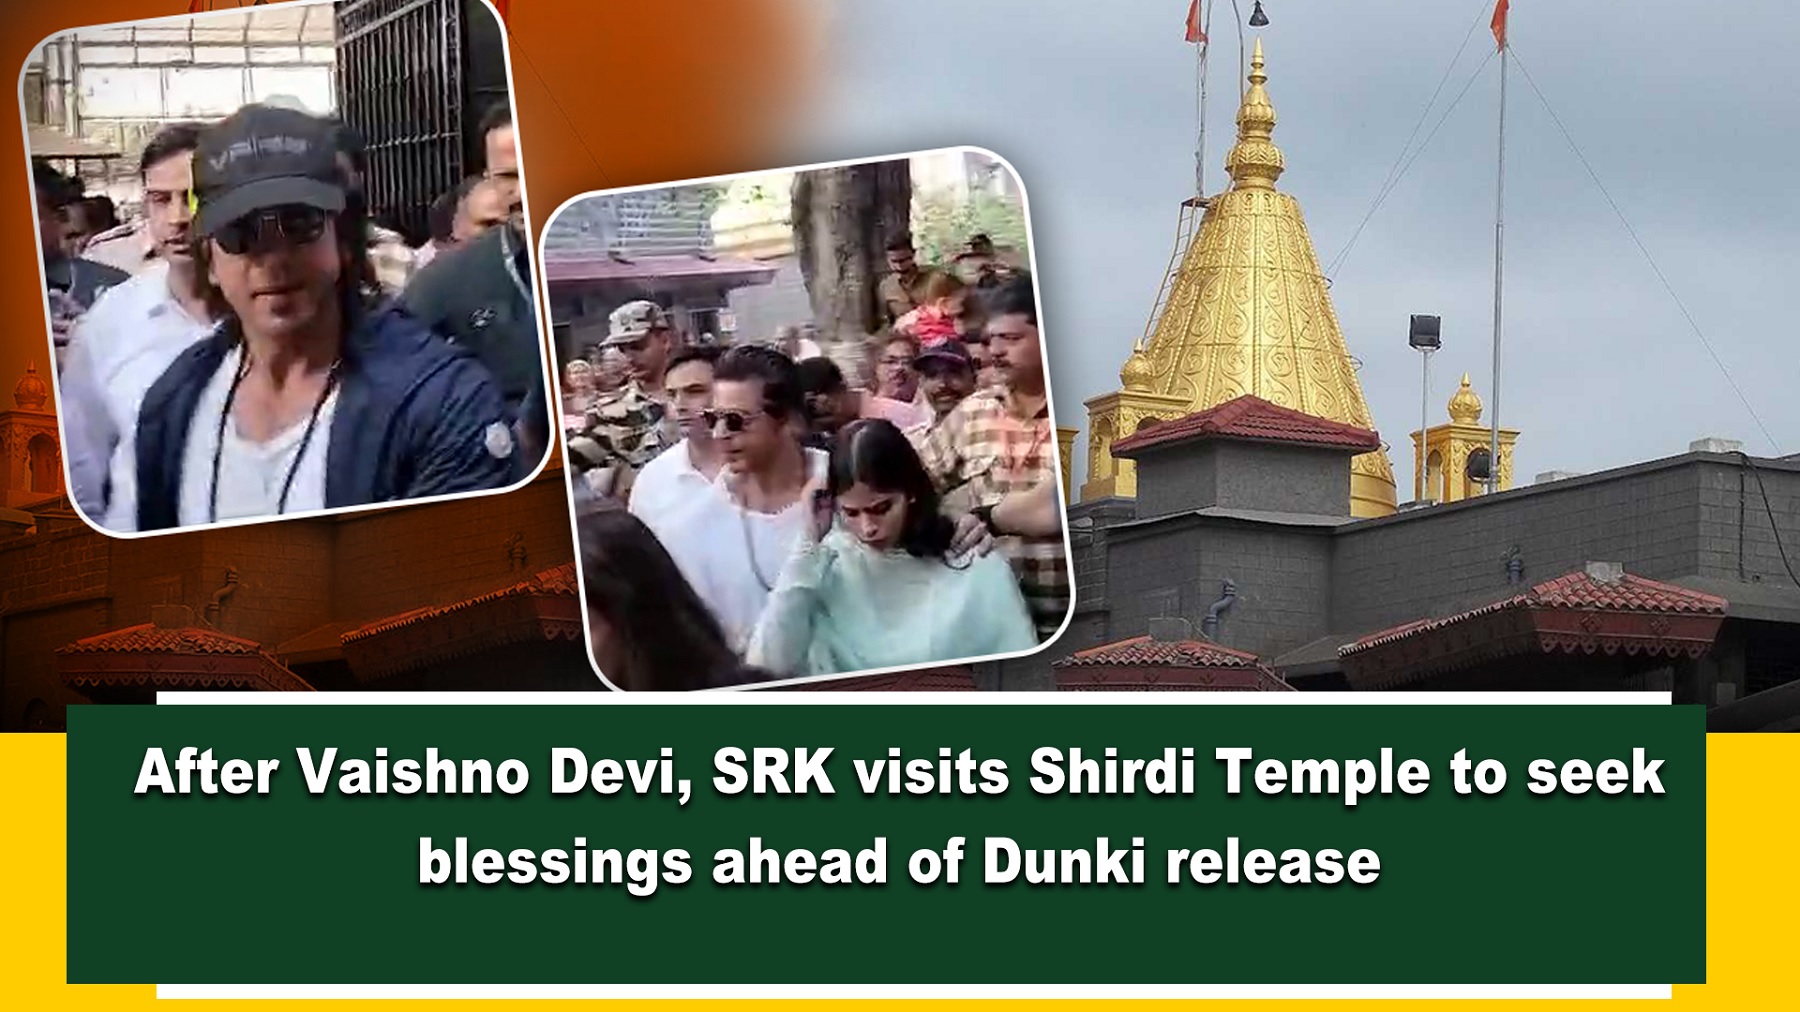 After Vaishno Devi, SRK visits Shirdi Temple to seek blessings ahead of Dunki release